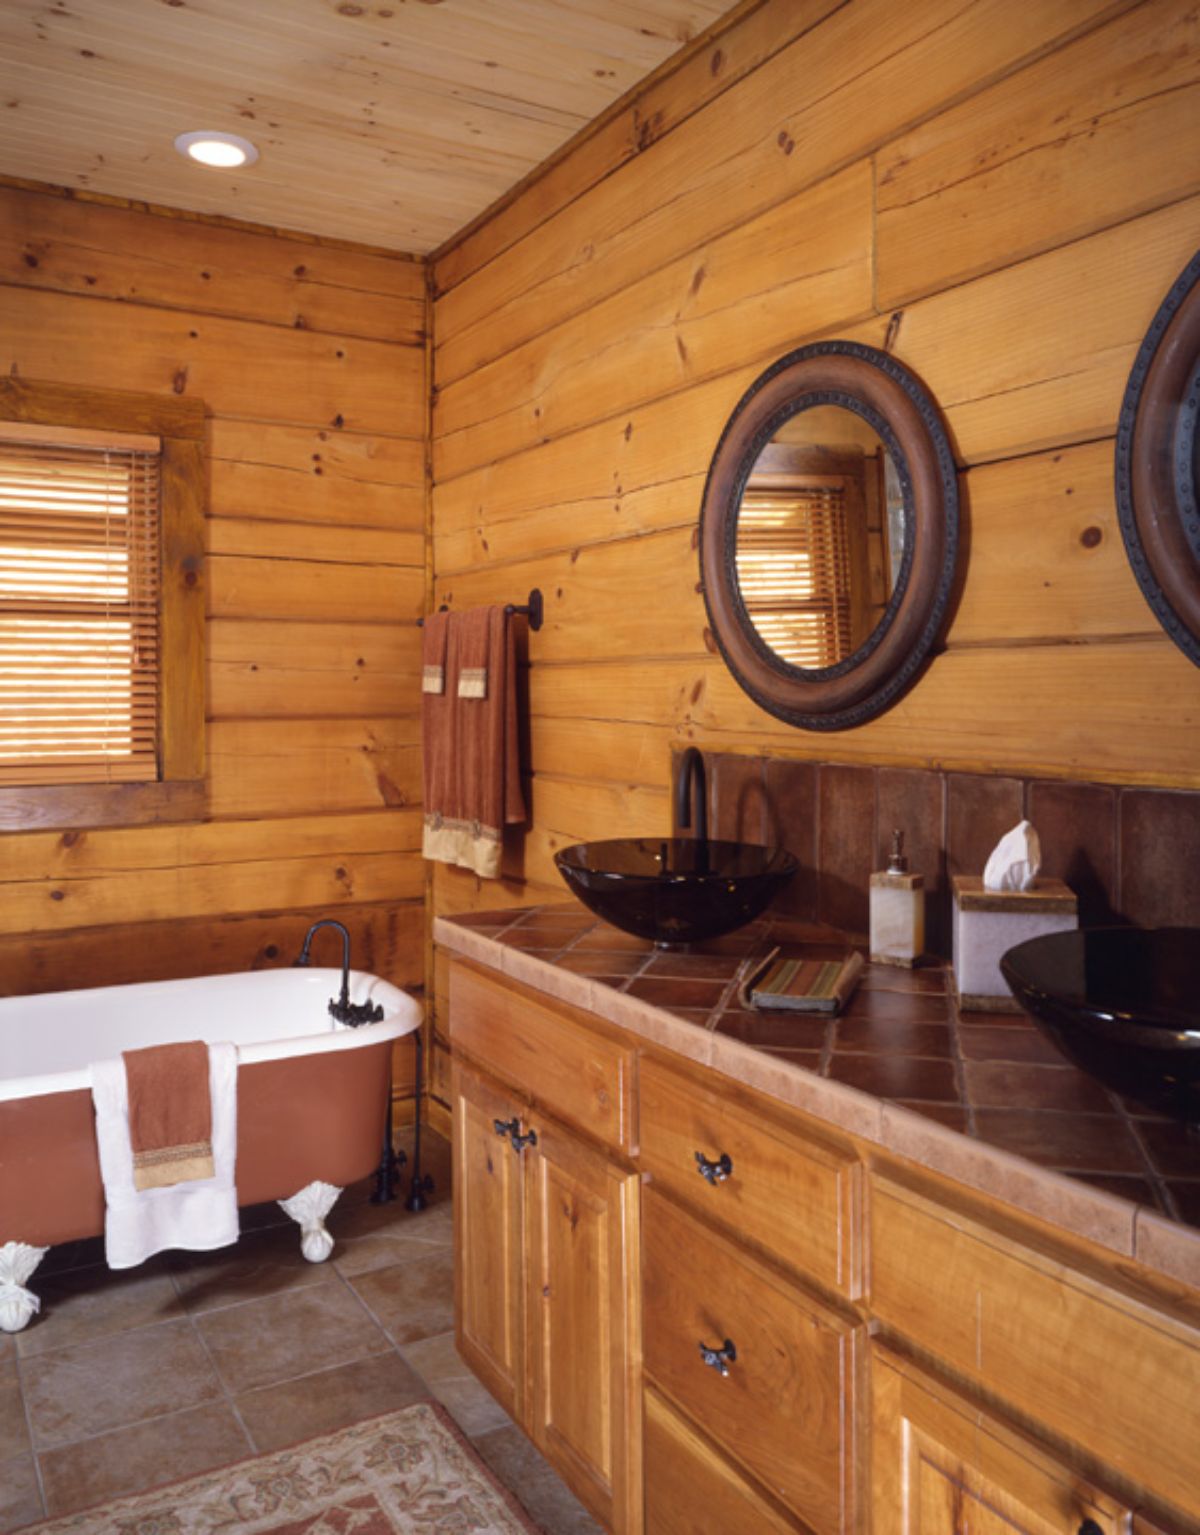 white and brown clawfoot bathtub in log bathroom with bowl sinks on top of wood cabinet